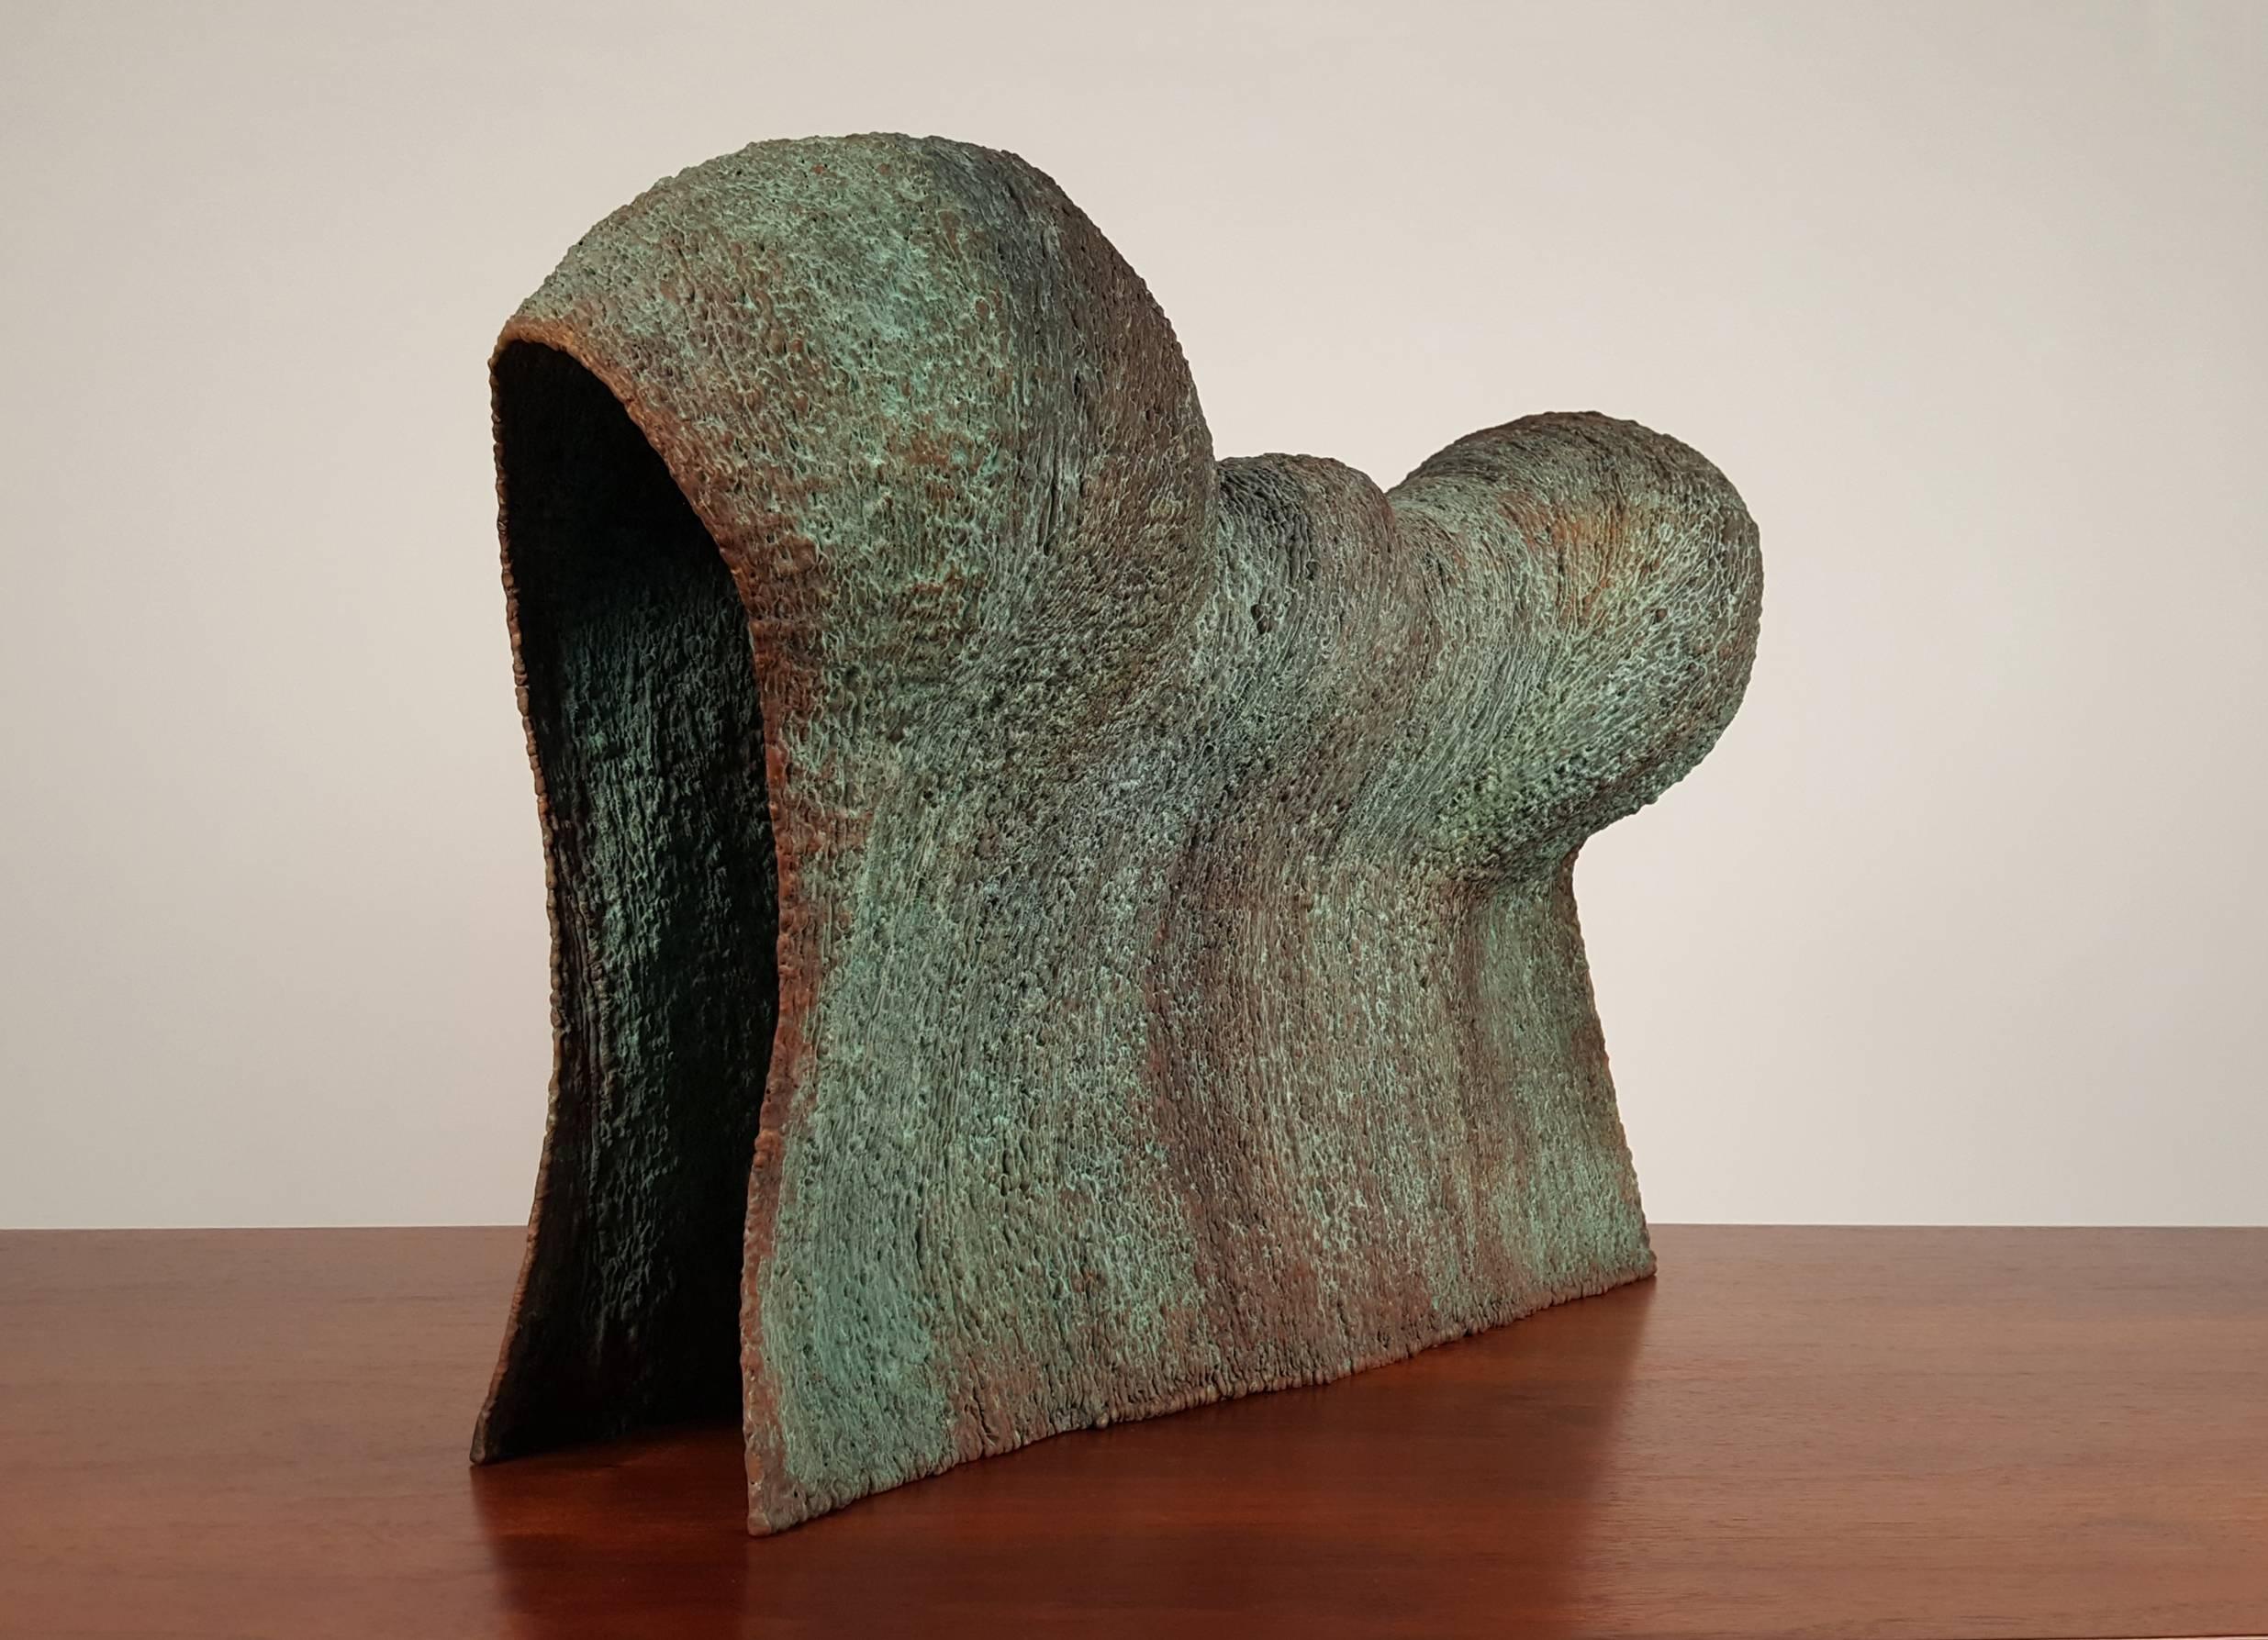 American Contemporary Brutalist Wave Form Sculpture in Bronze by Douglas Ihlenfeld